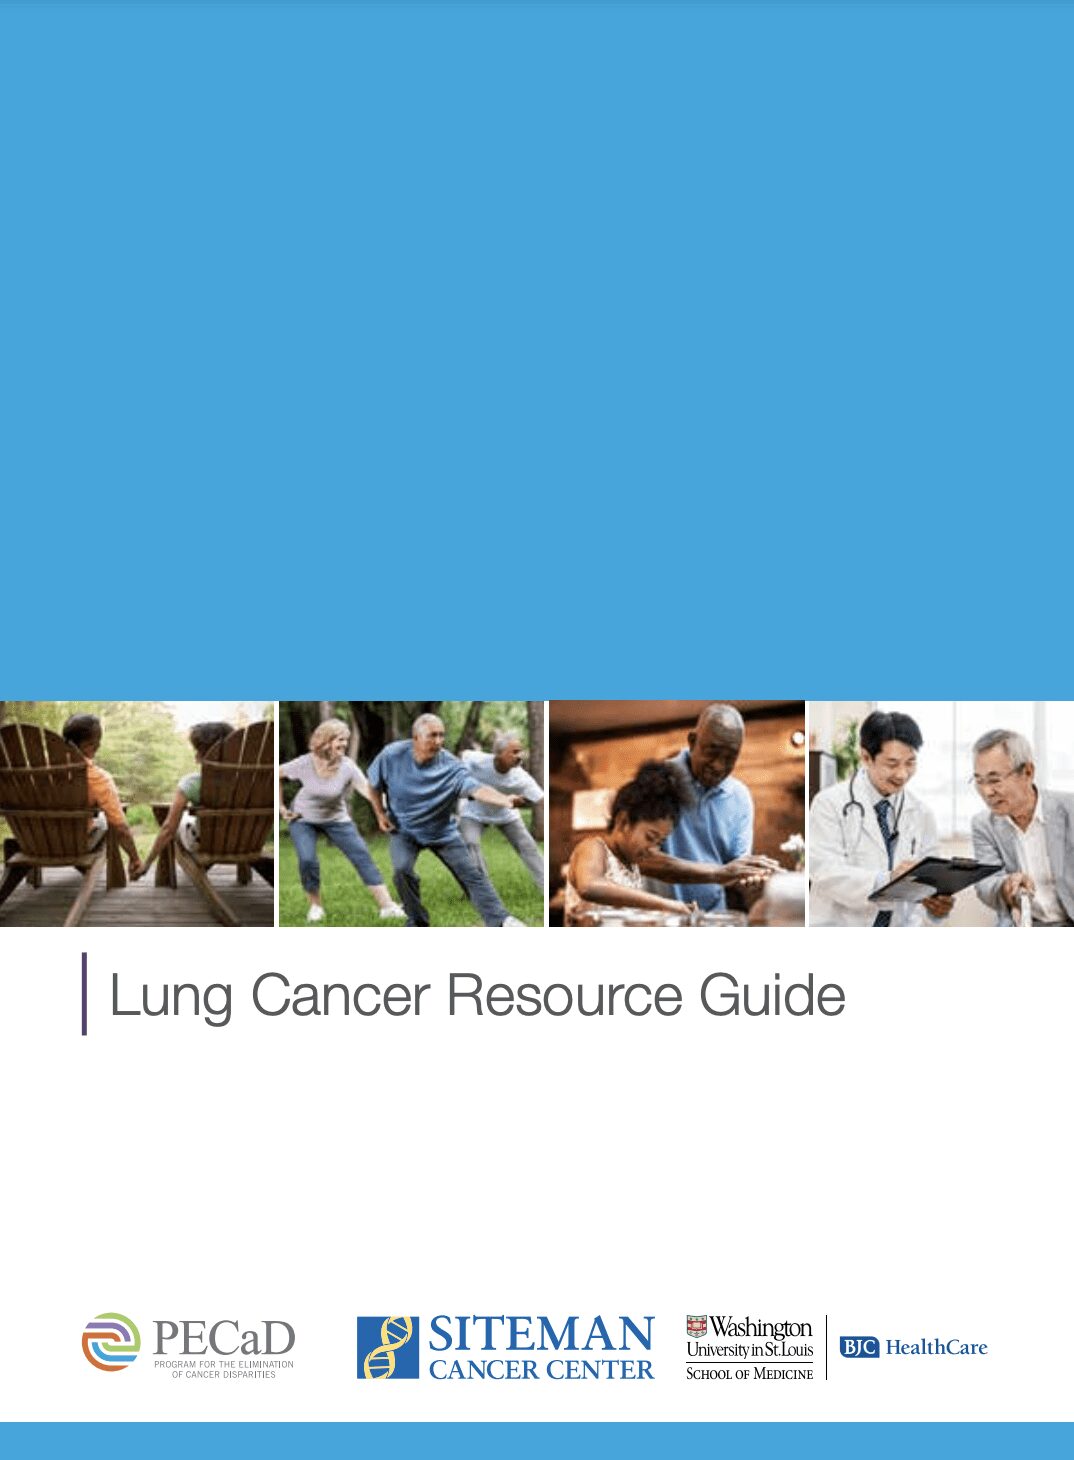 Lung cancer resources